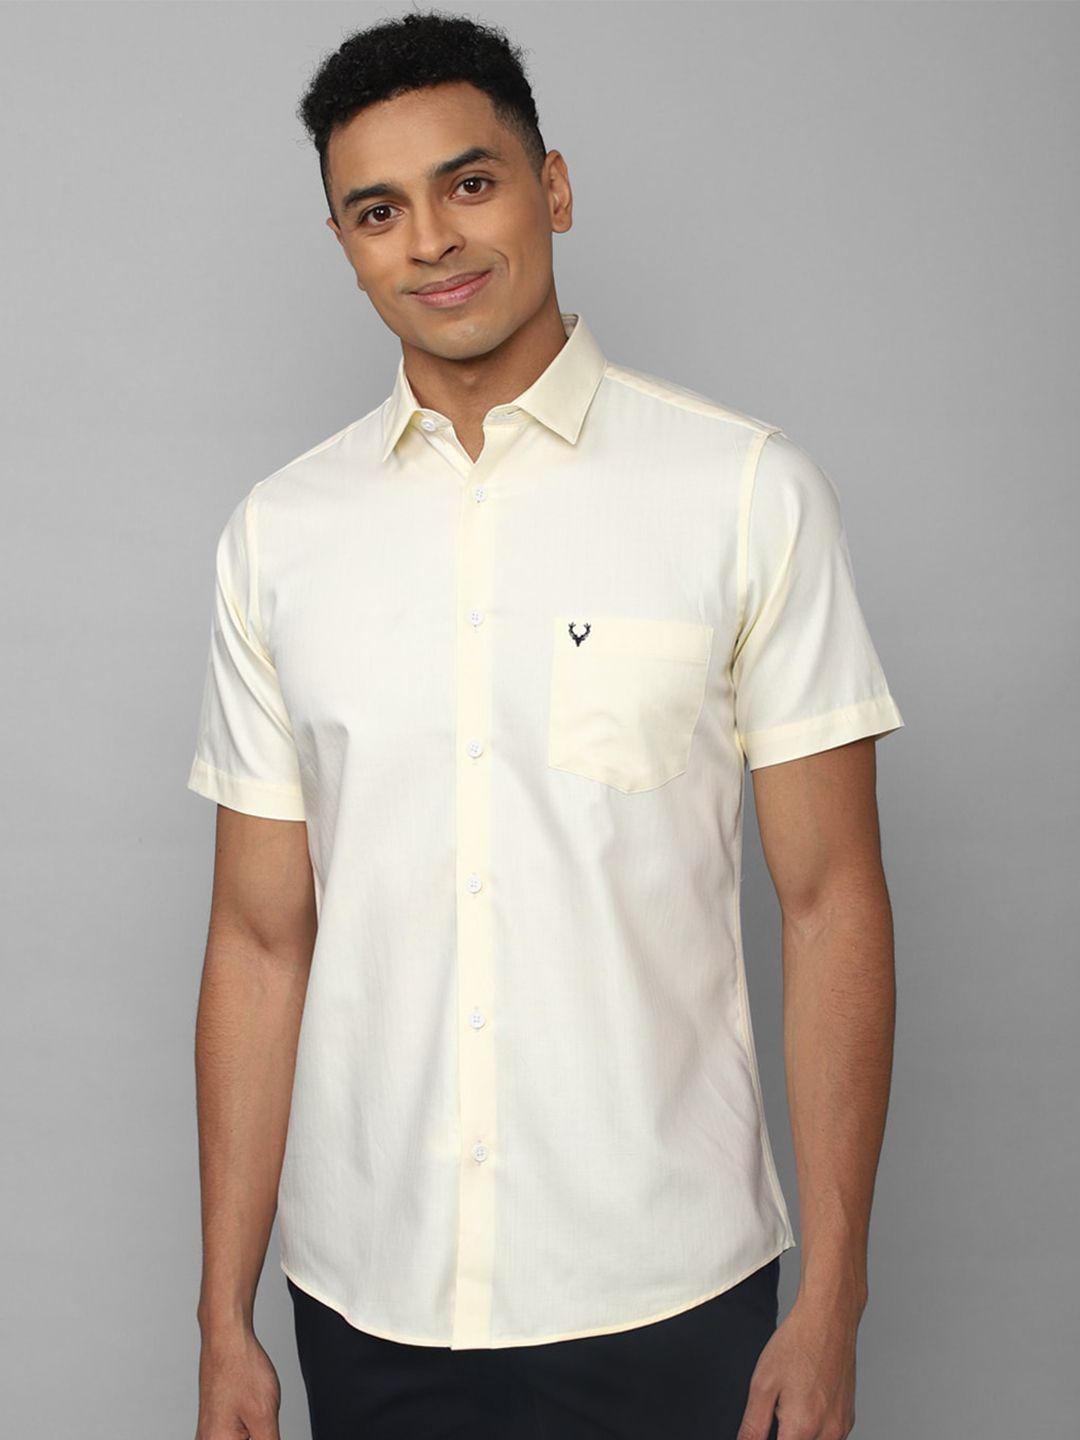 allen solly slim fit pure cotton casual shirt